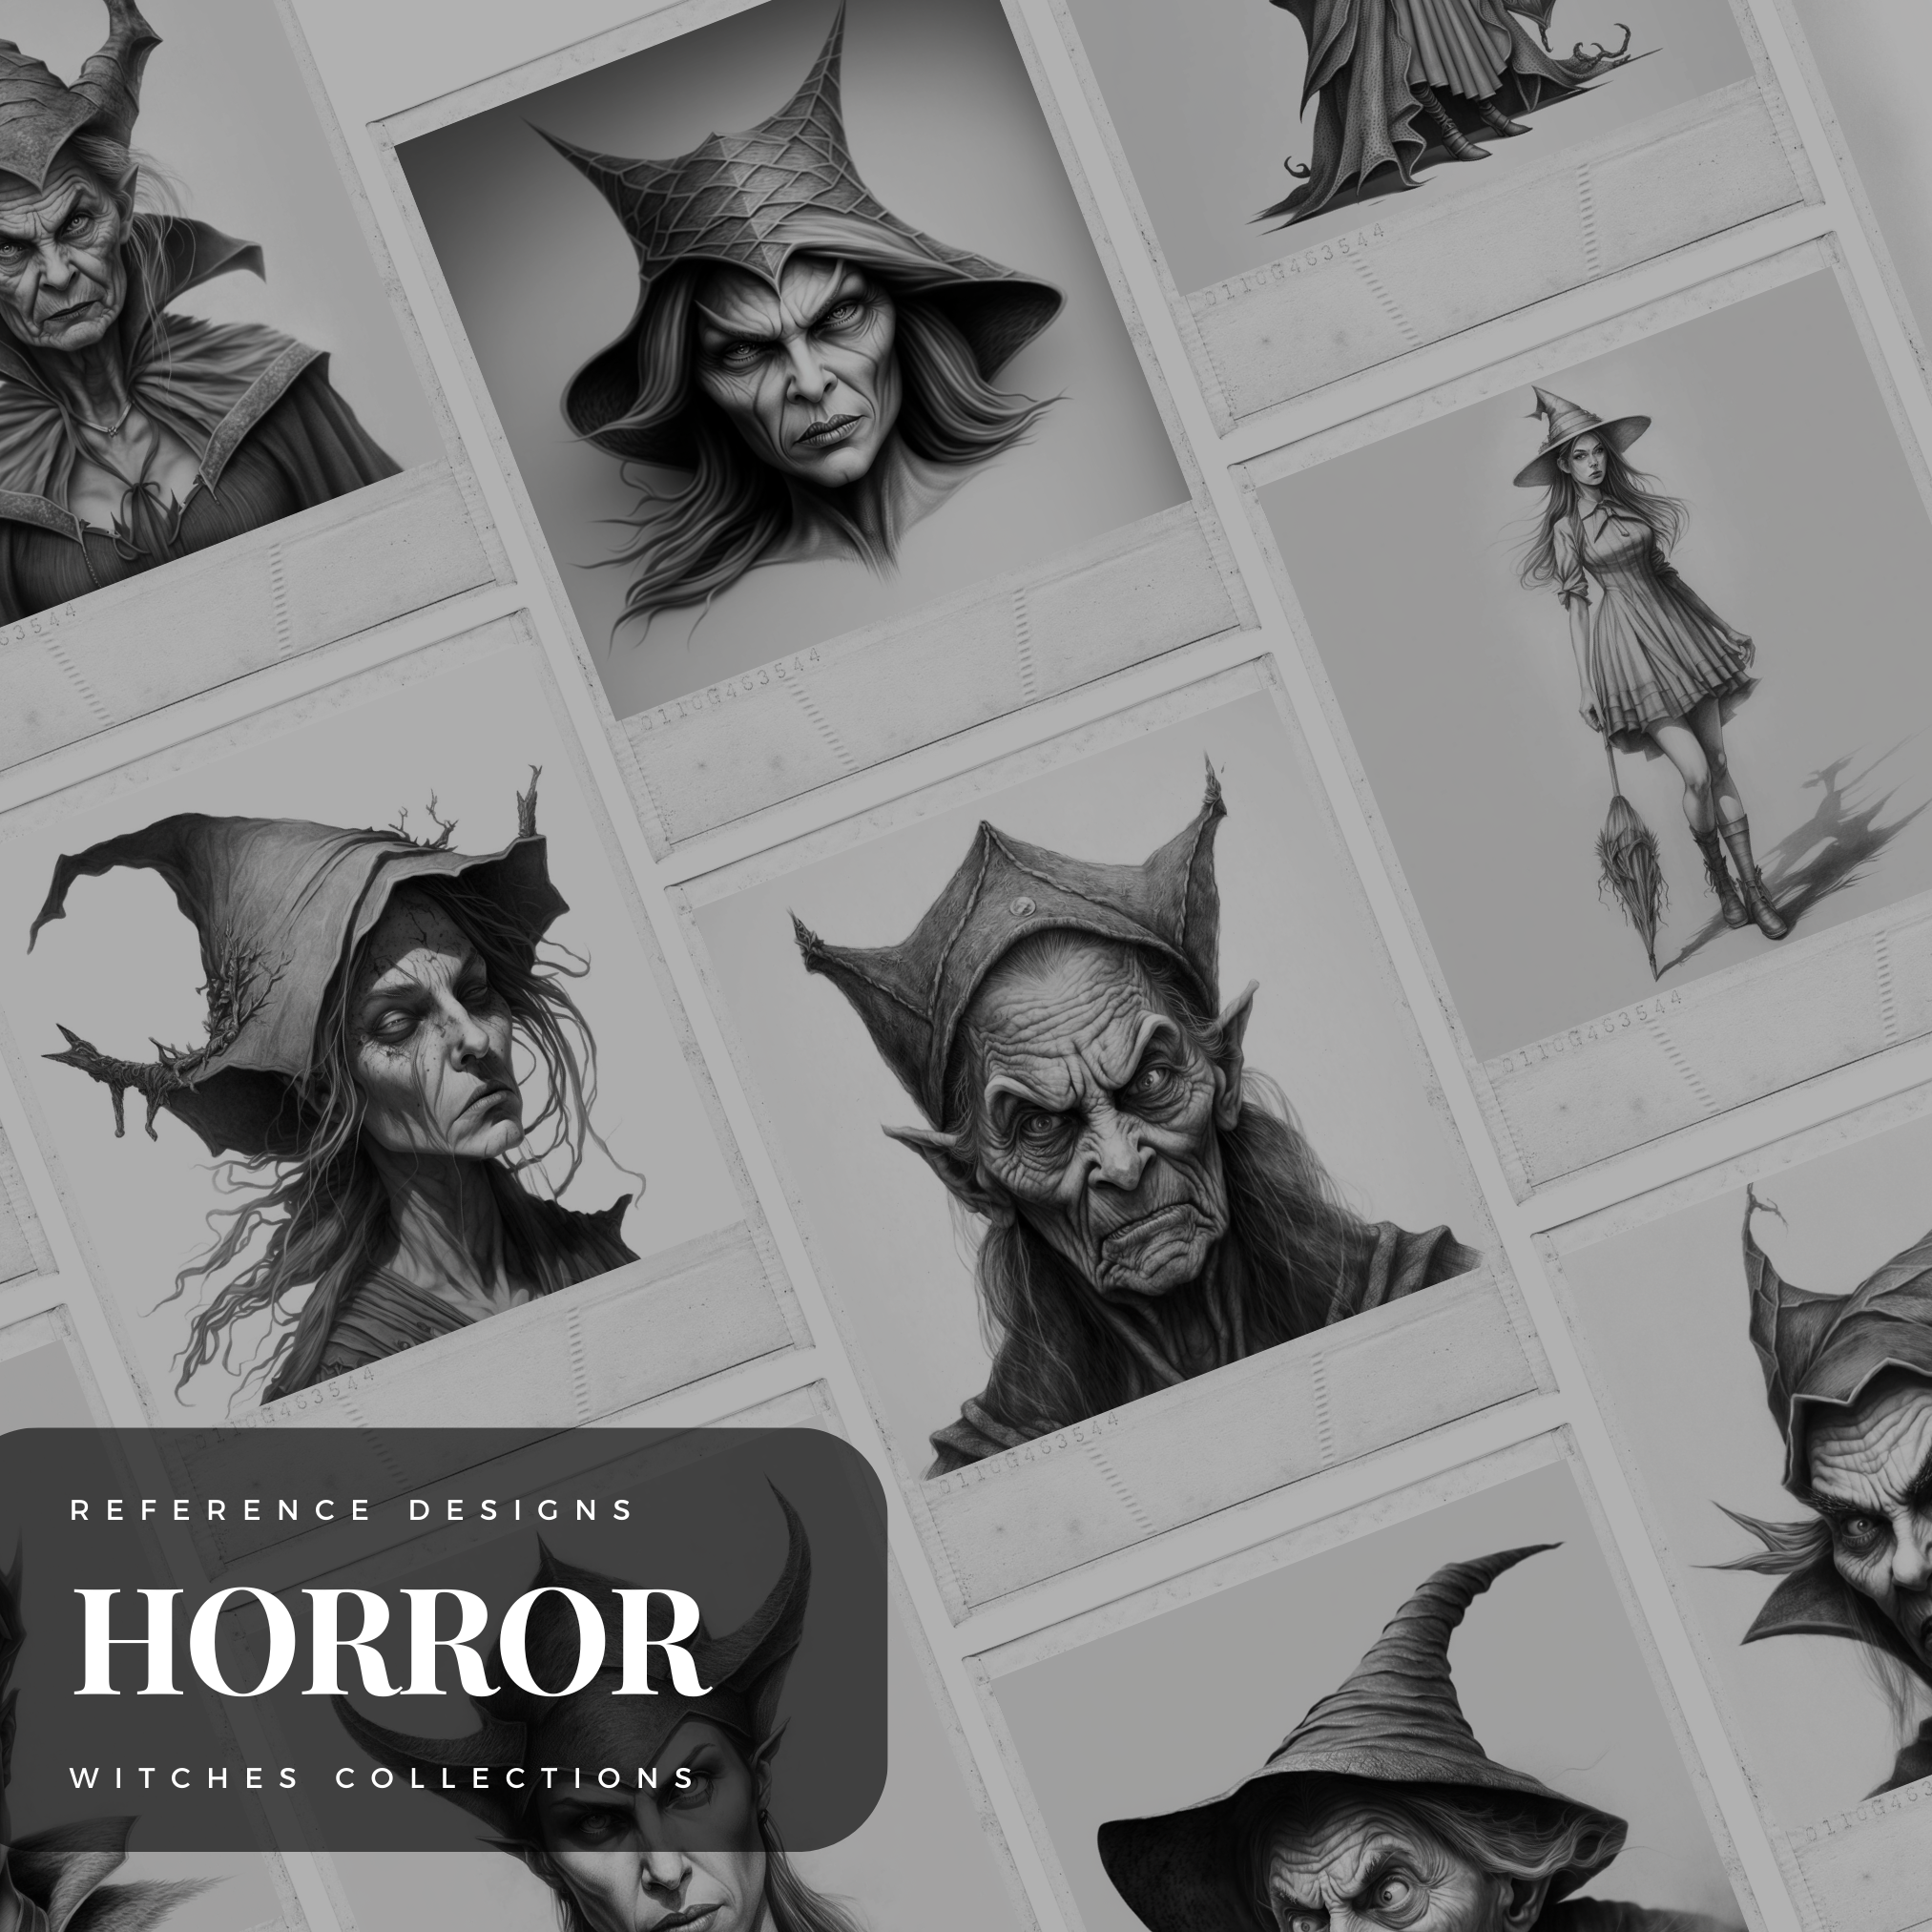 Witches Digital Horror Design Collection: 50 Procreate & Sketchbook Images